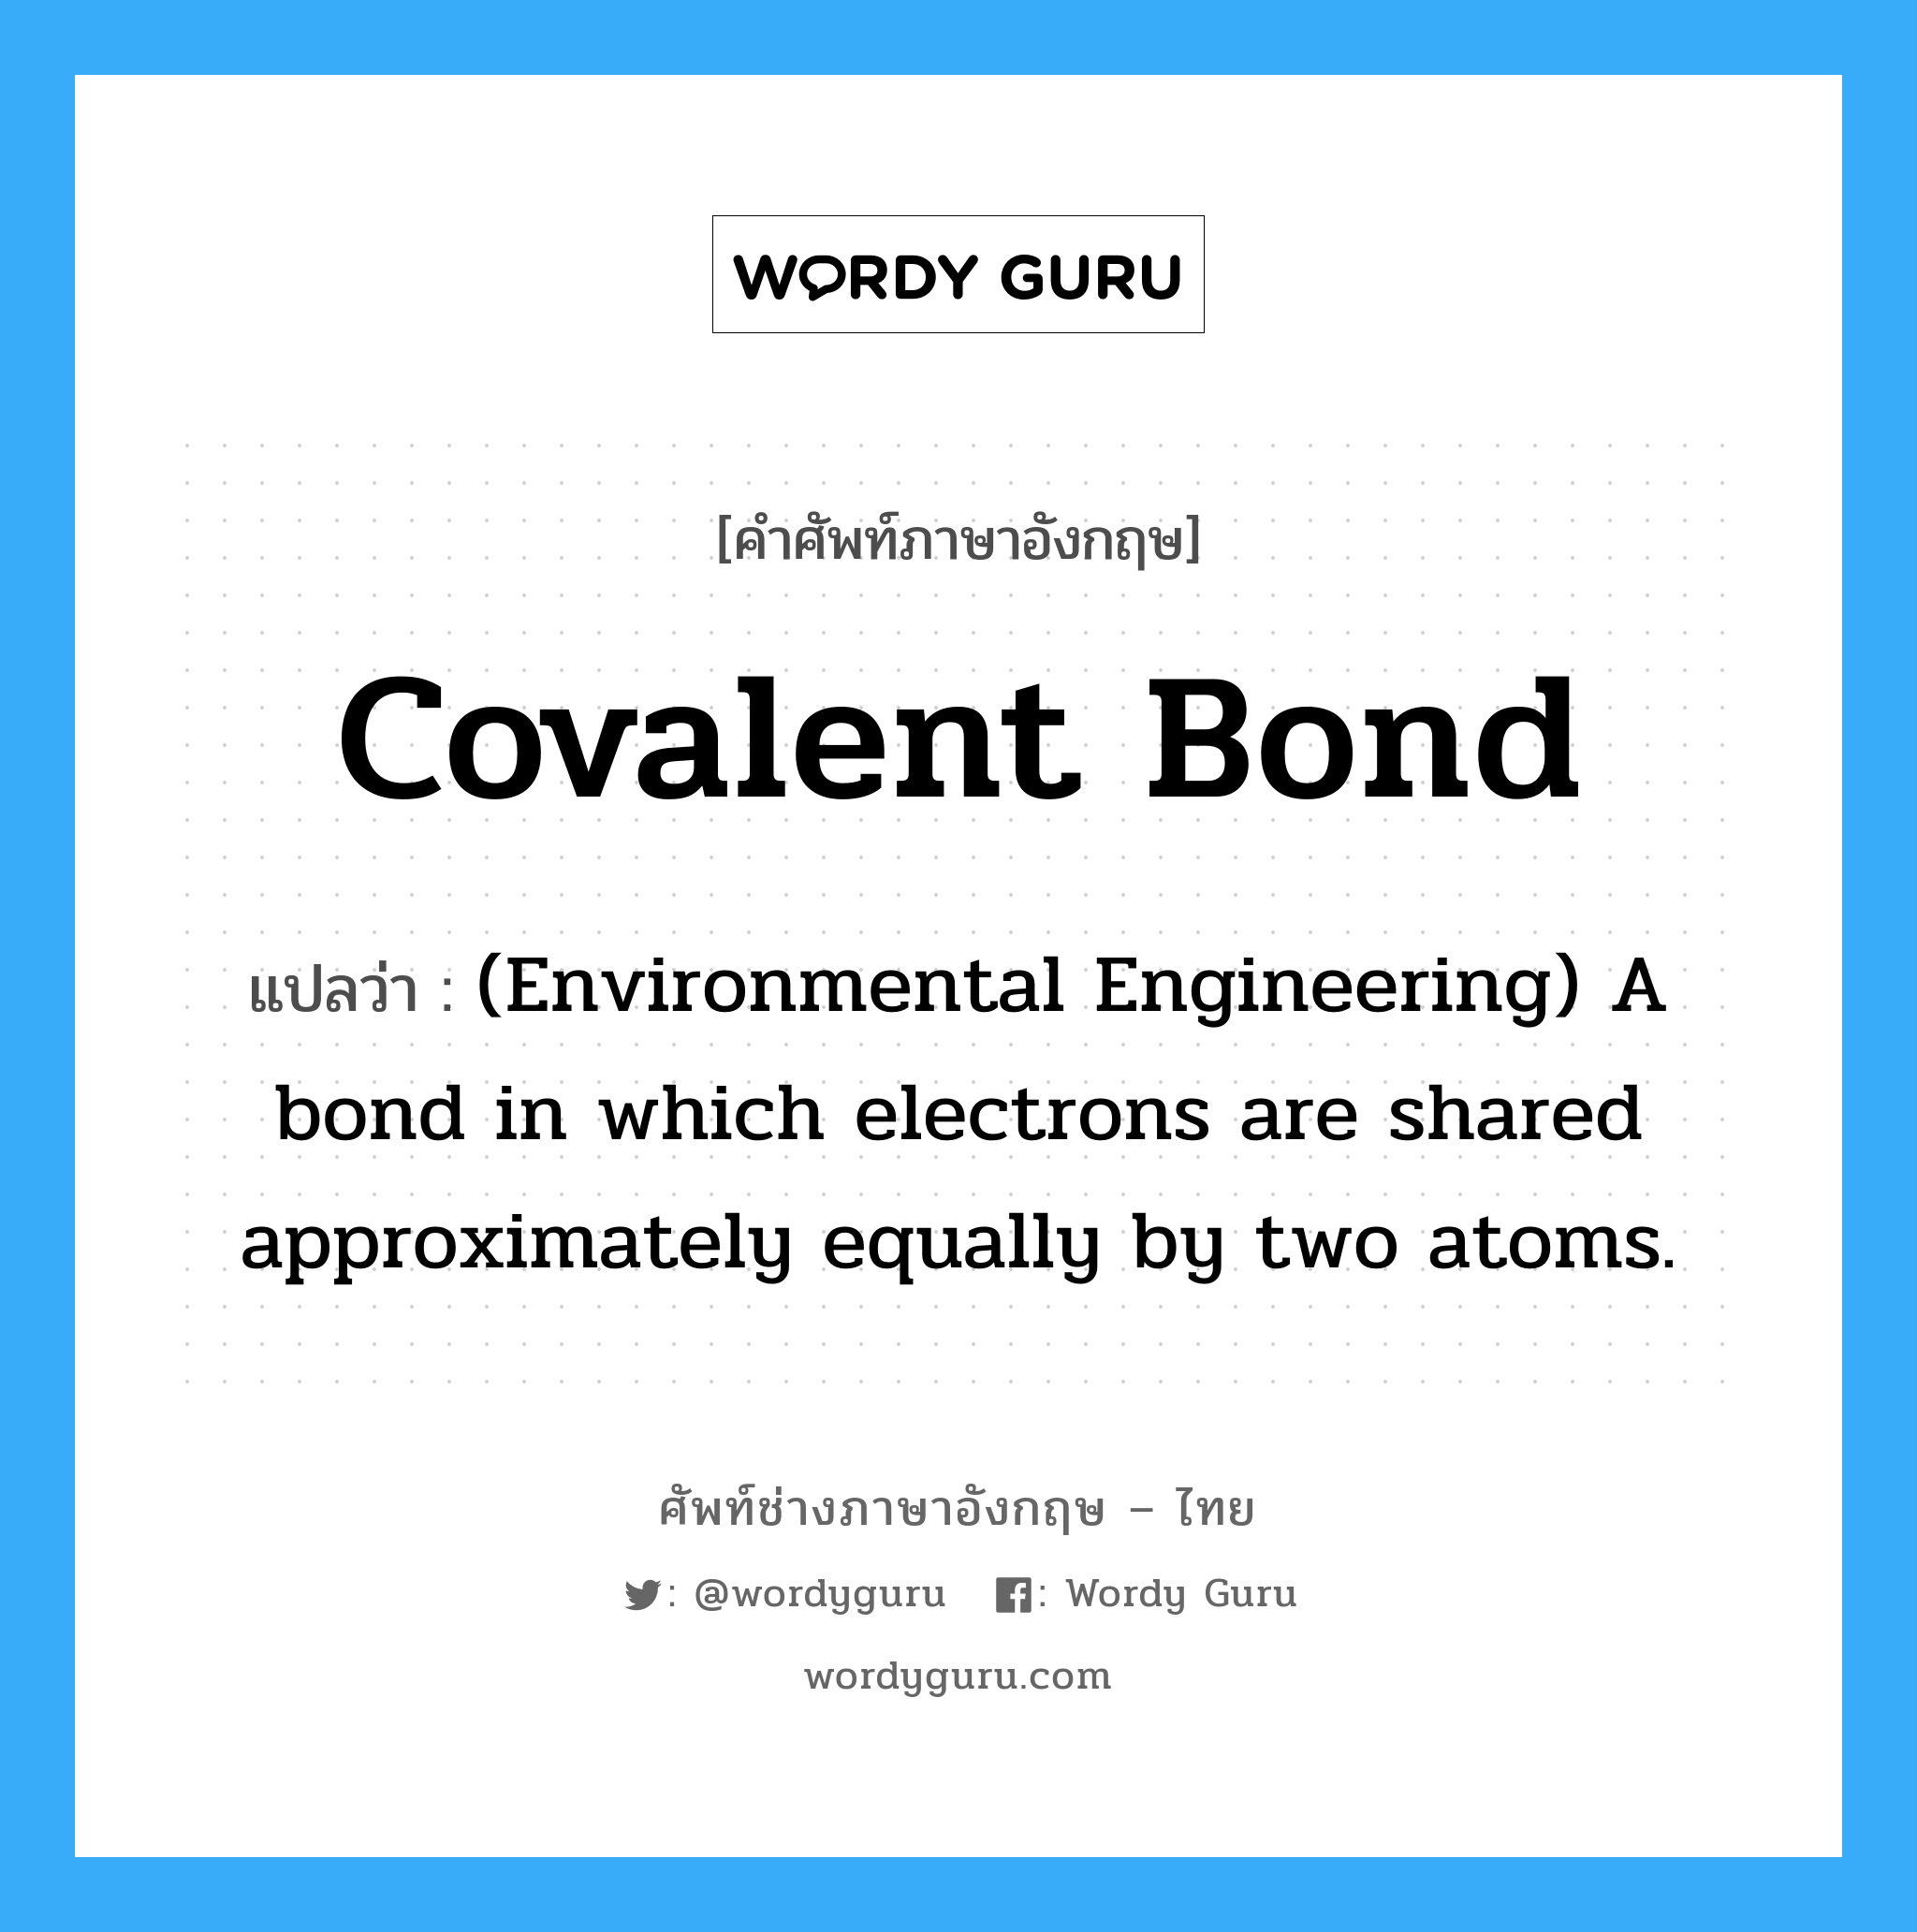 Covalent bond แปลว่า?, คำศัพท์ช่างภาษาอังกฤษ - ไทย Covalent bond คำศัพท์ภาษาอังกฤษ Covalent bond แปลว่า (Environmental Engineering) A bond in which electrons are shared approximately equally by two atoms.